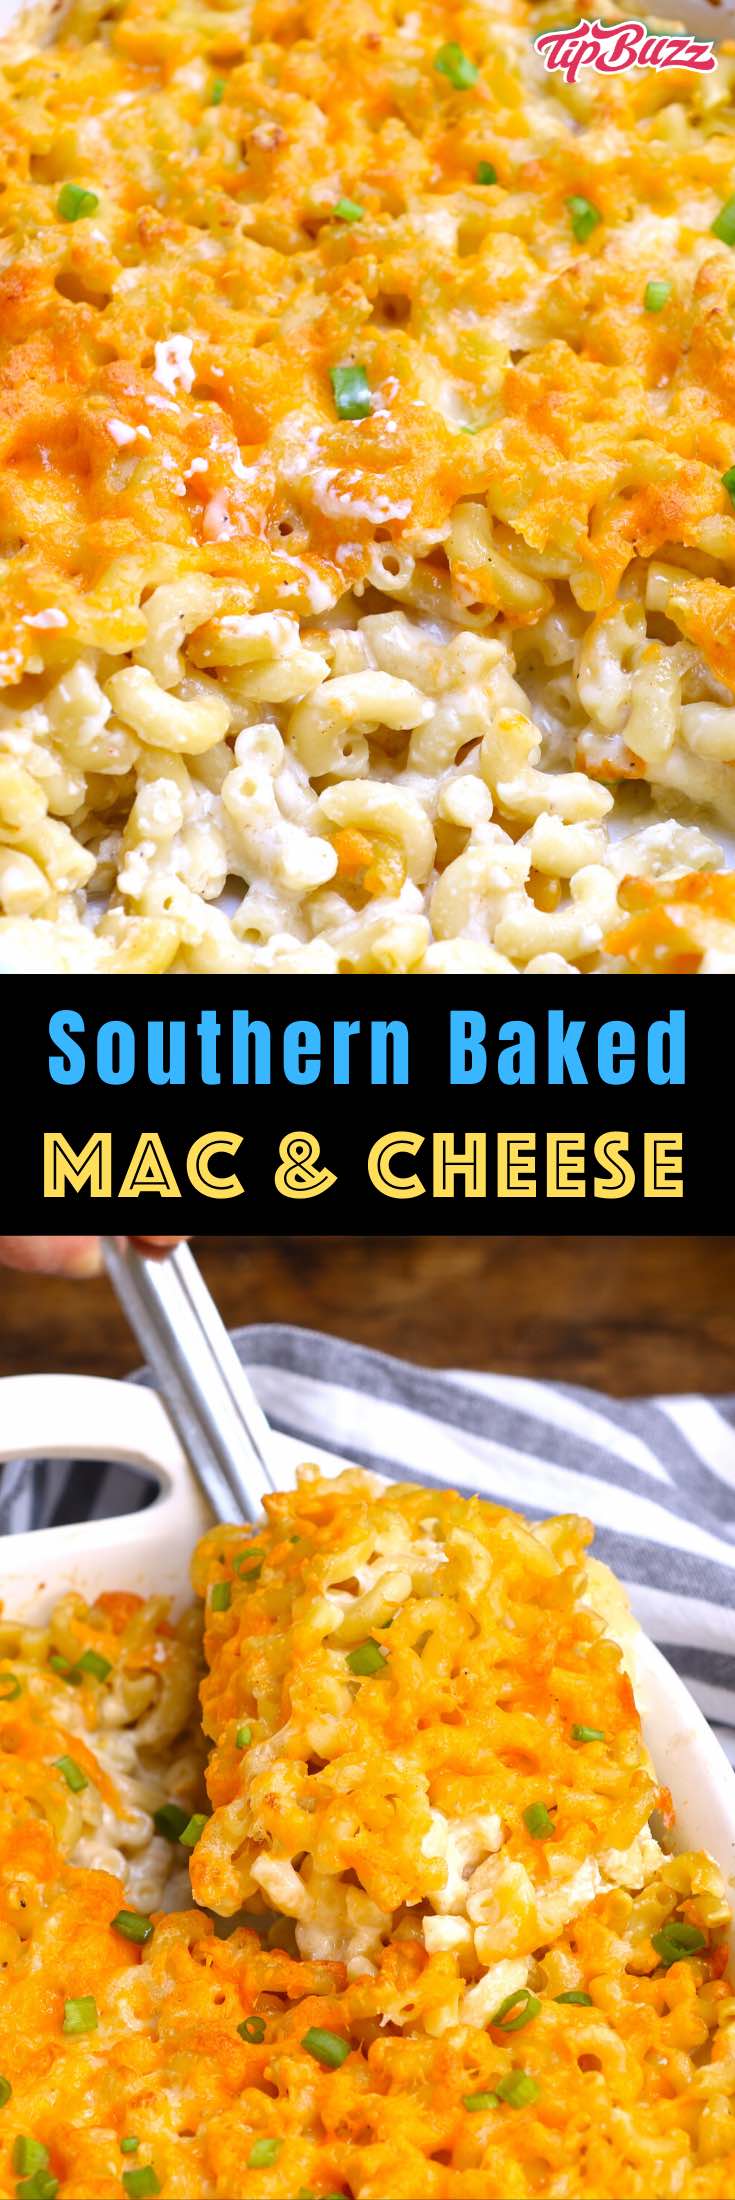 Southern Mac and Cheese is creamy, cheesy and baked to perfection. This authentic recipe only needs 10 minutes of prep with no need to make a cheese sauce. #southernmacandcheese #bakedmacandcheese